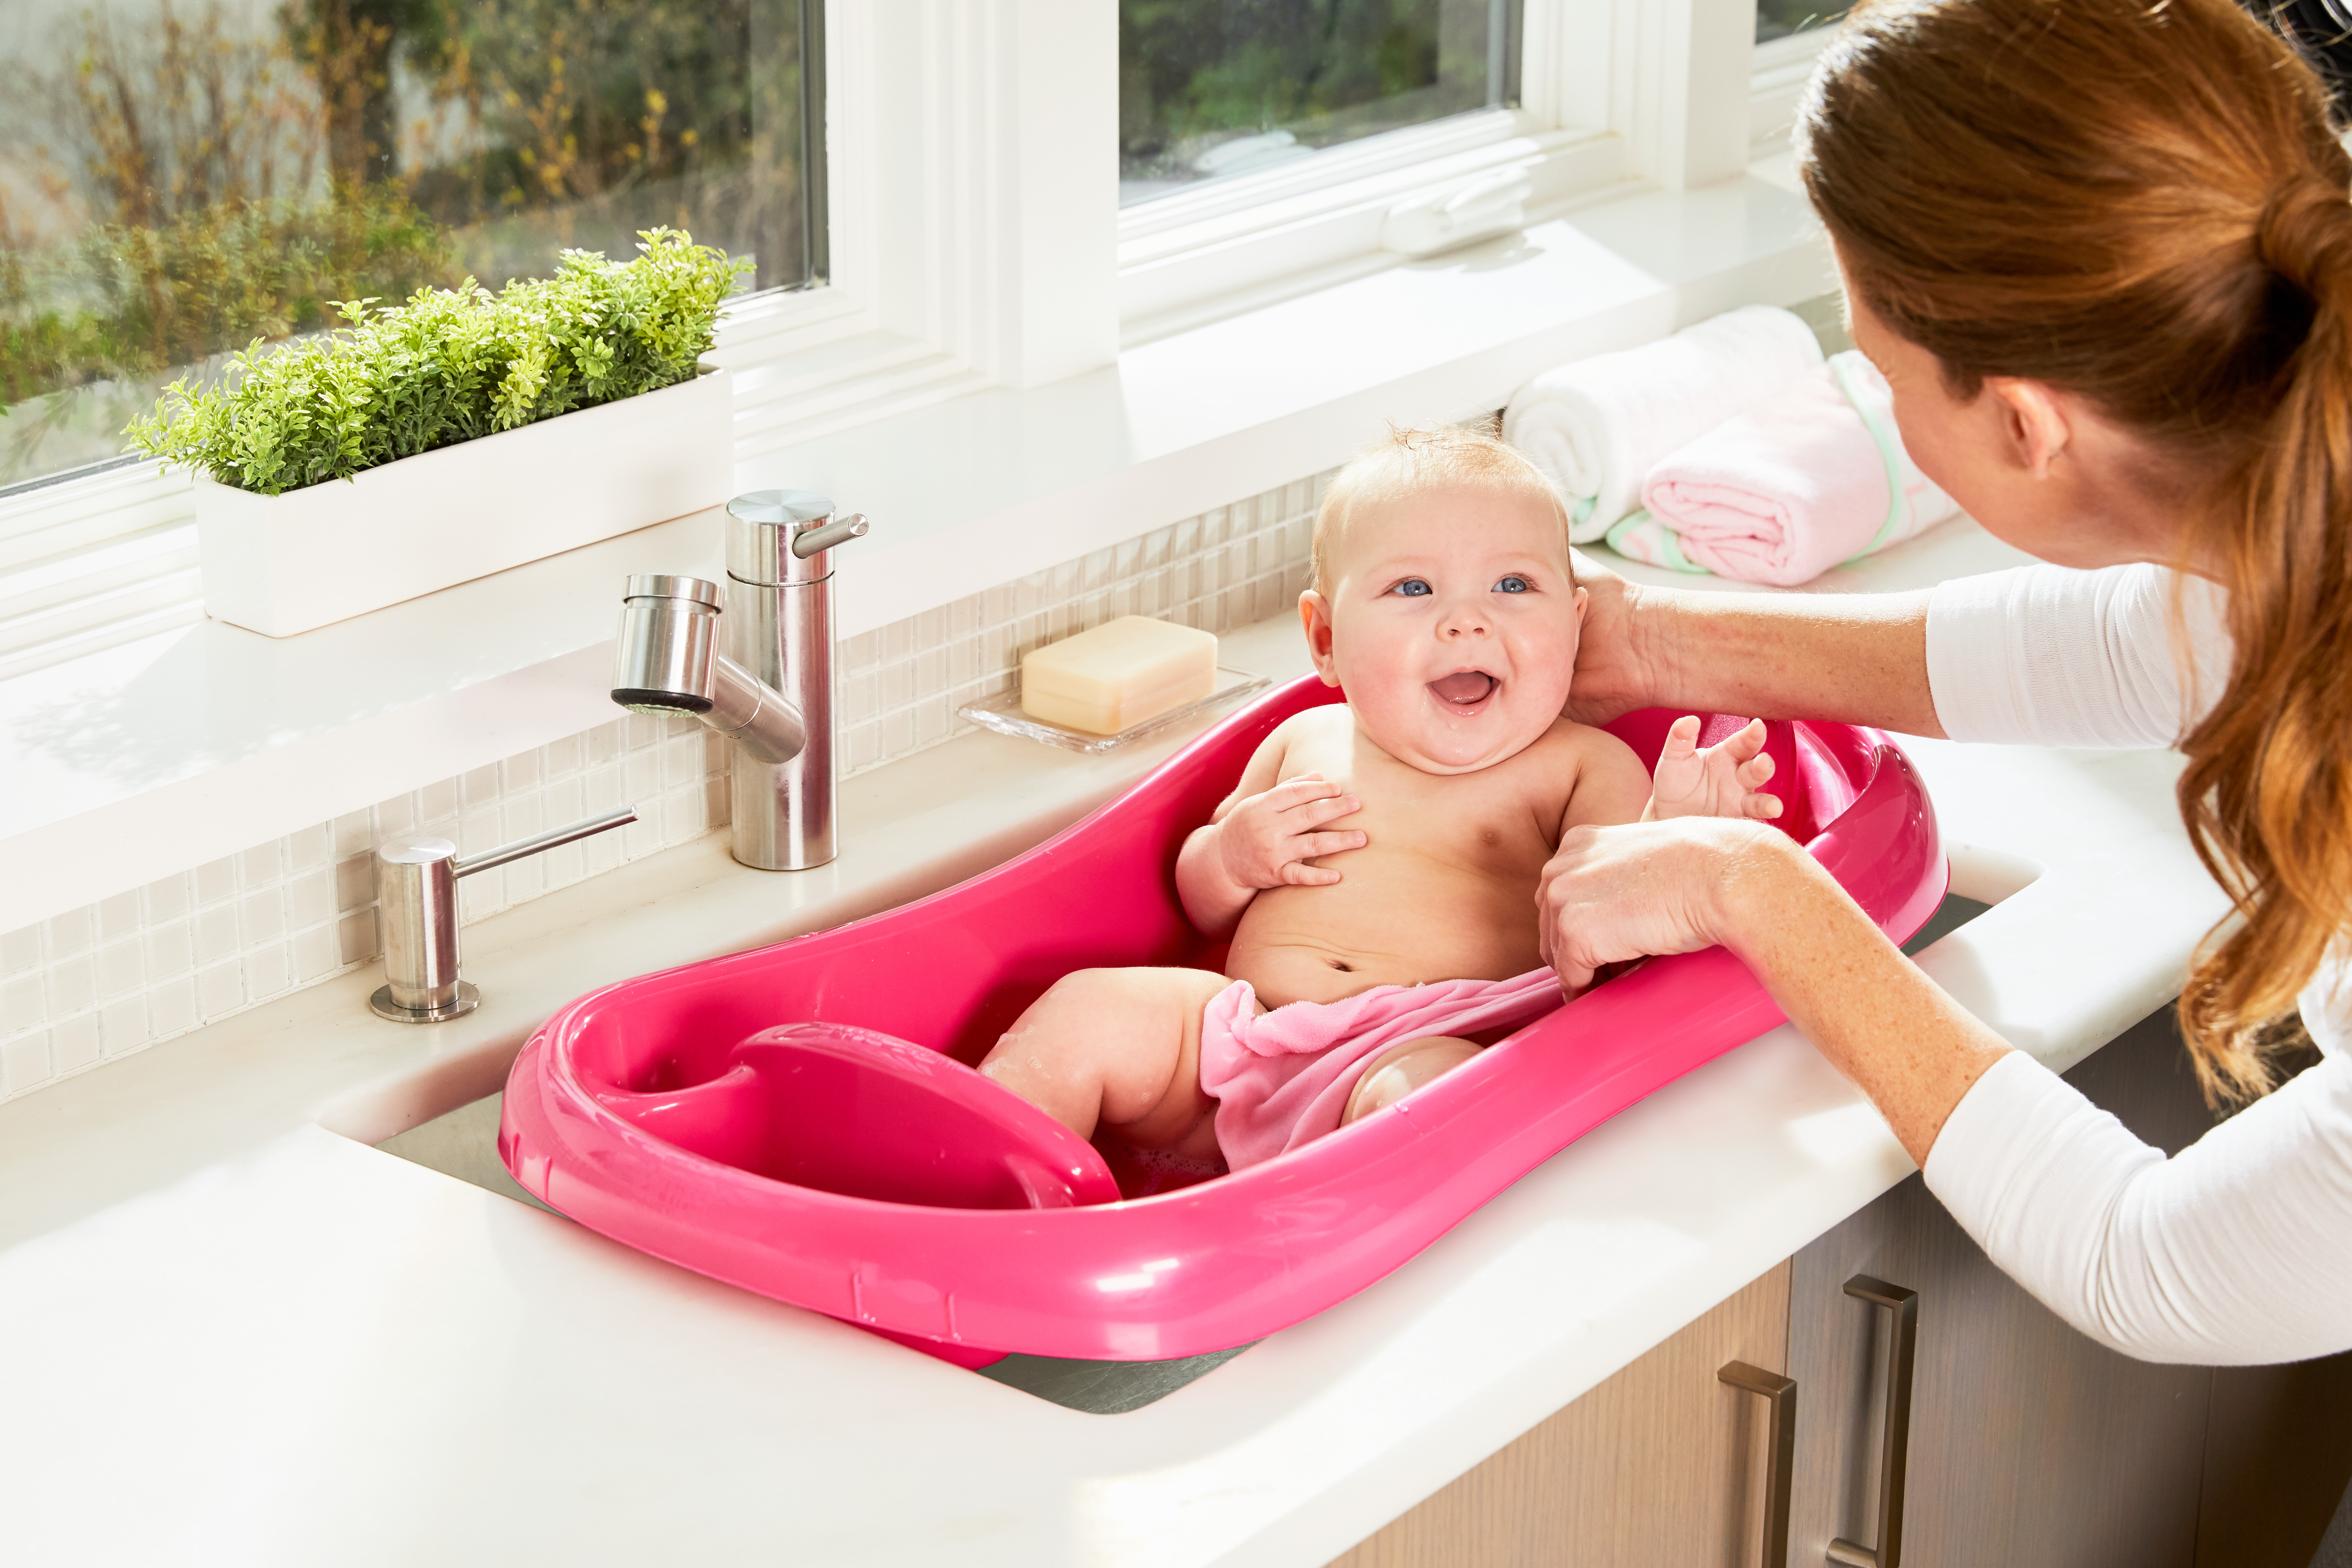 The First Years Y7135 Sure Comfort Deluxe Newborn To Toddler Tub Pink - image 5 of 7